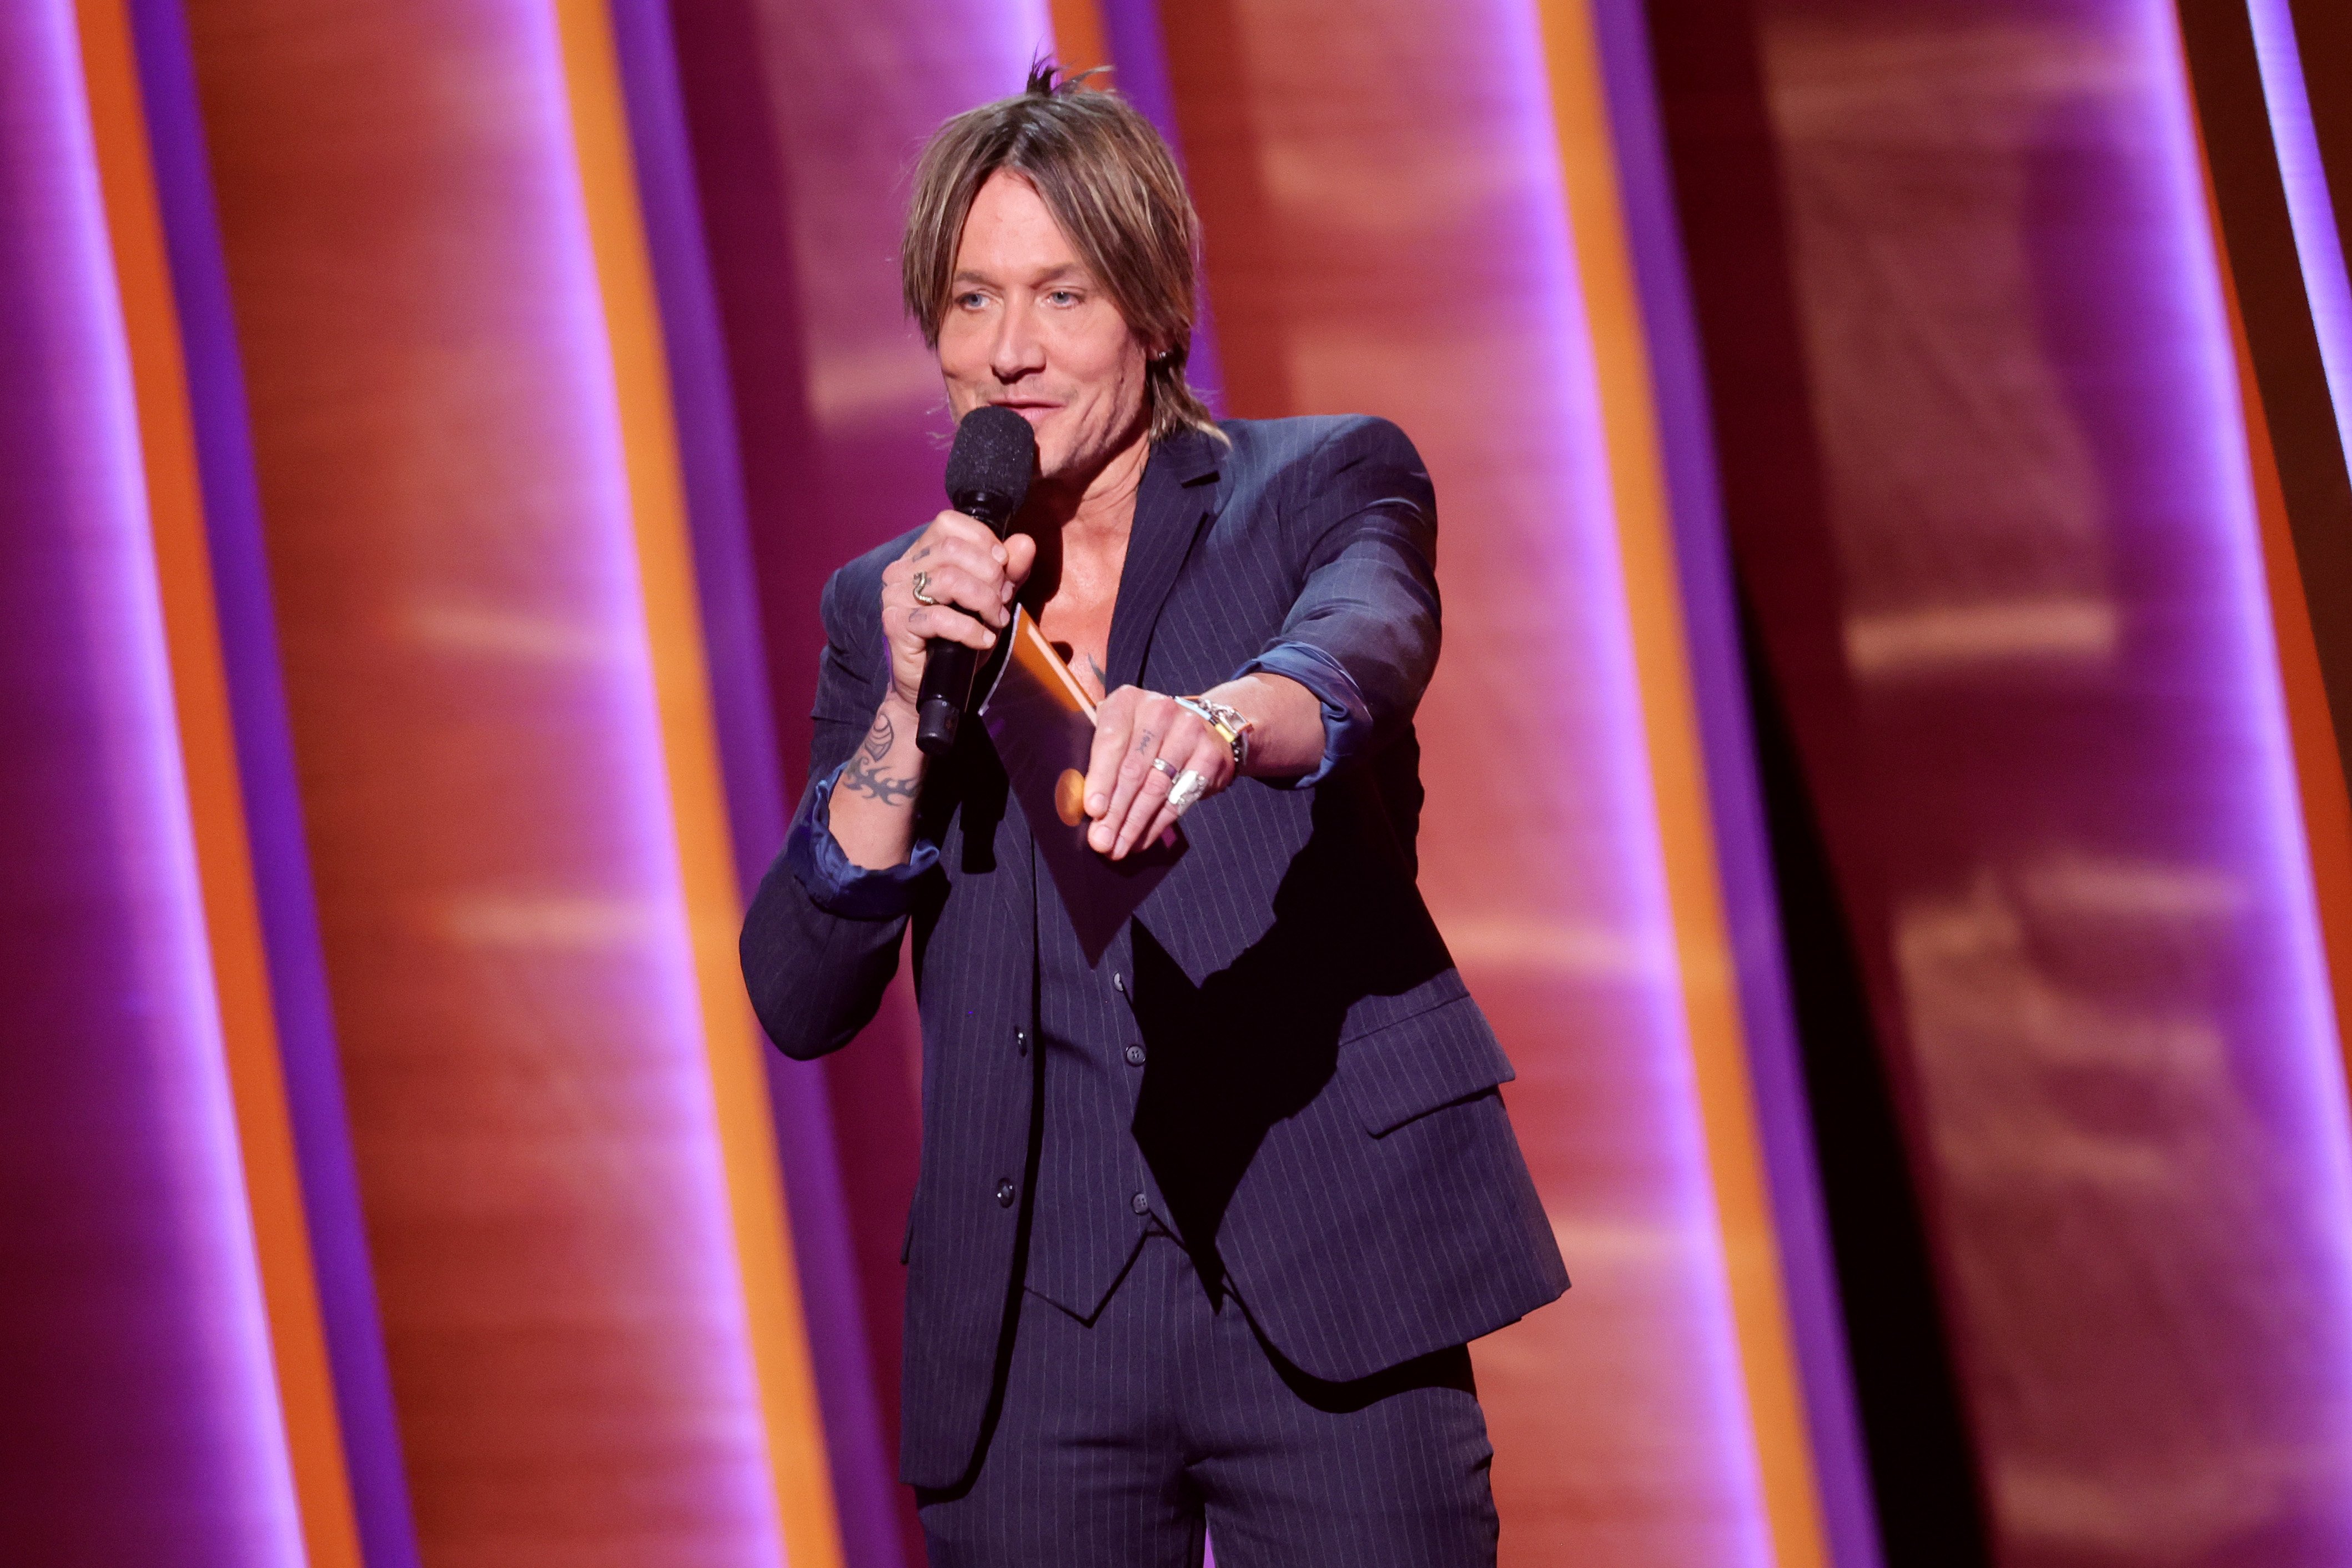 How Keith Urban Reacted When a Record Label Executive Told Him ‘Golden Road’ Shouldn’t Be an Album